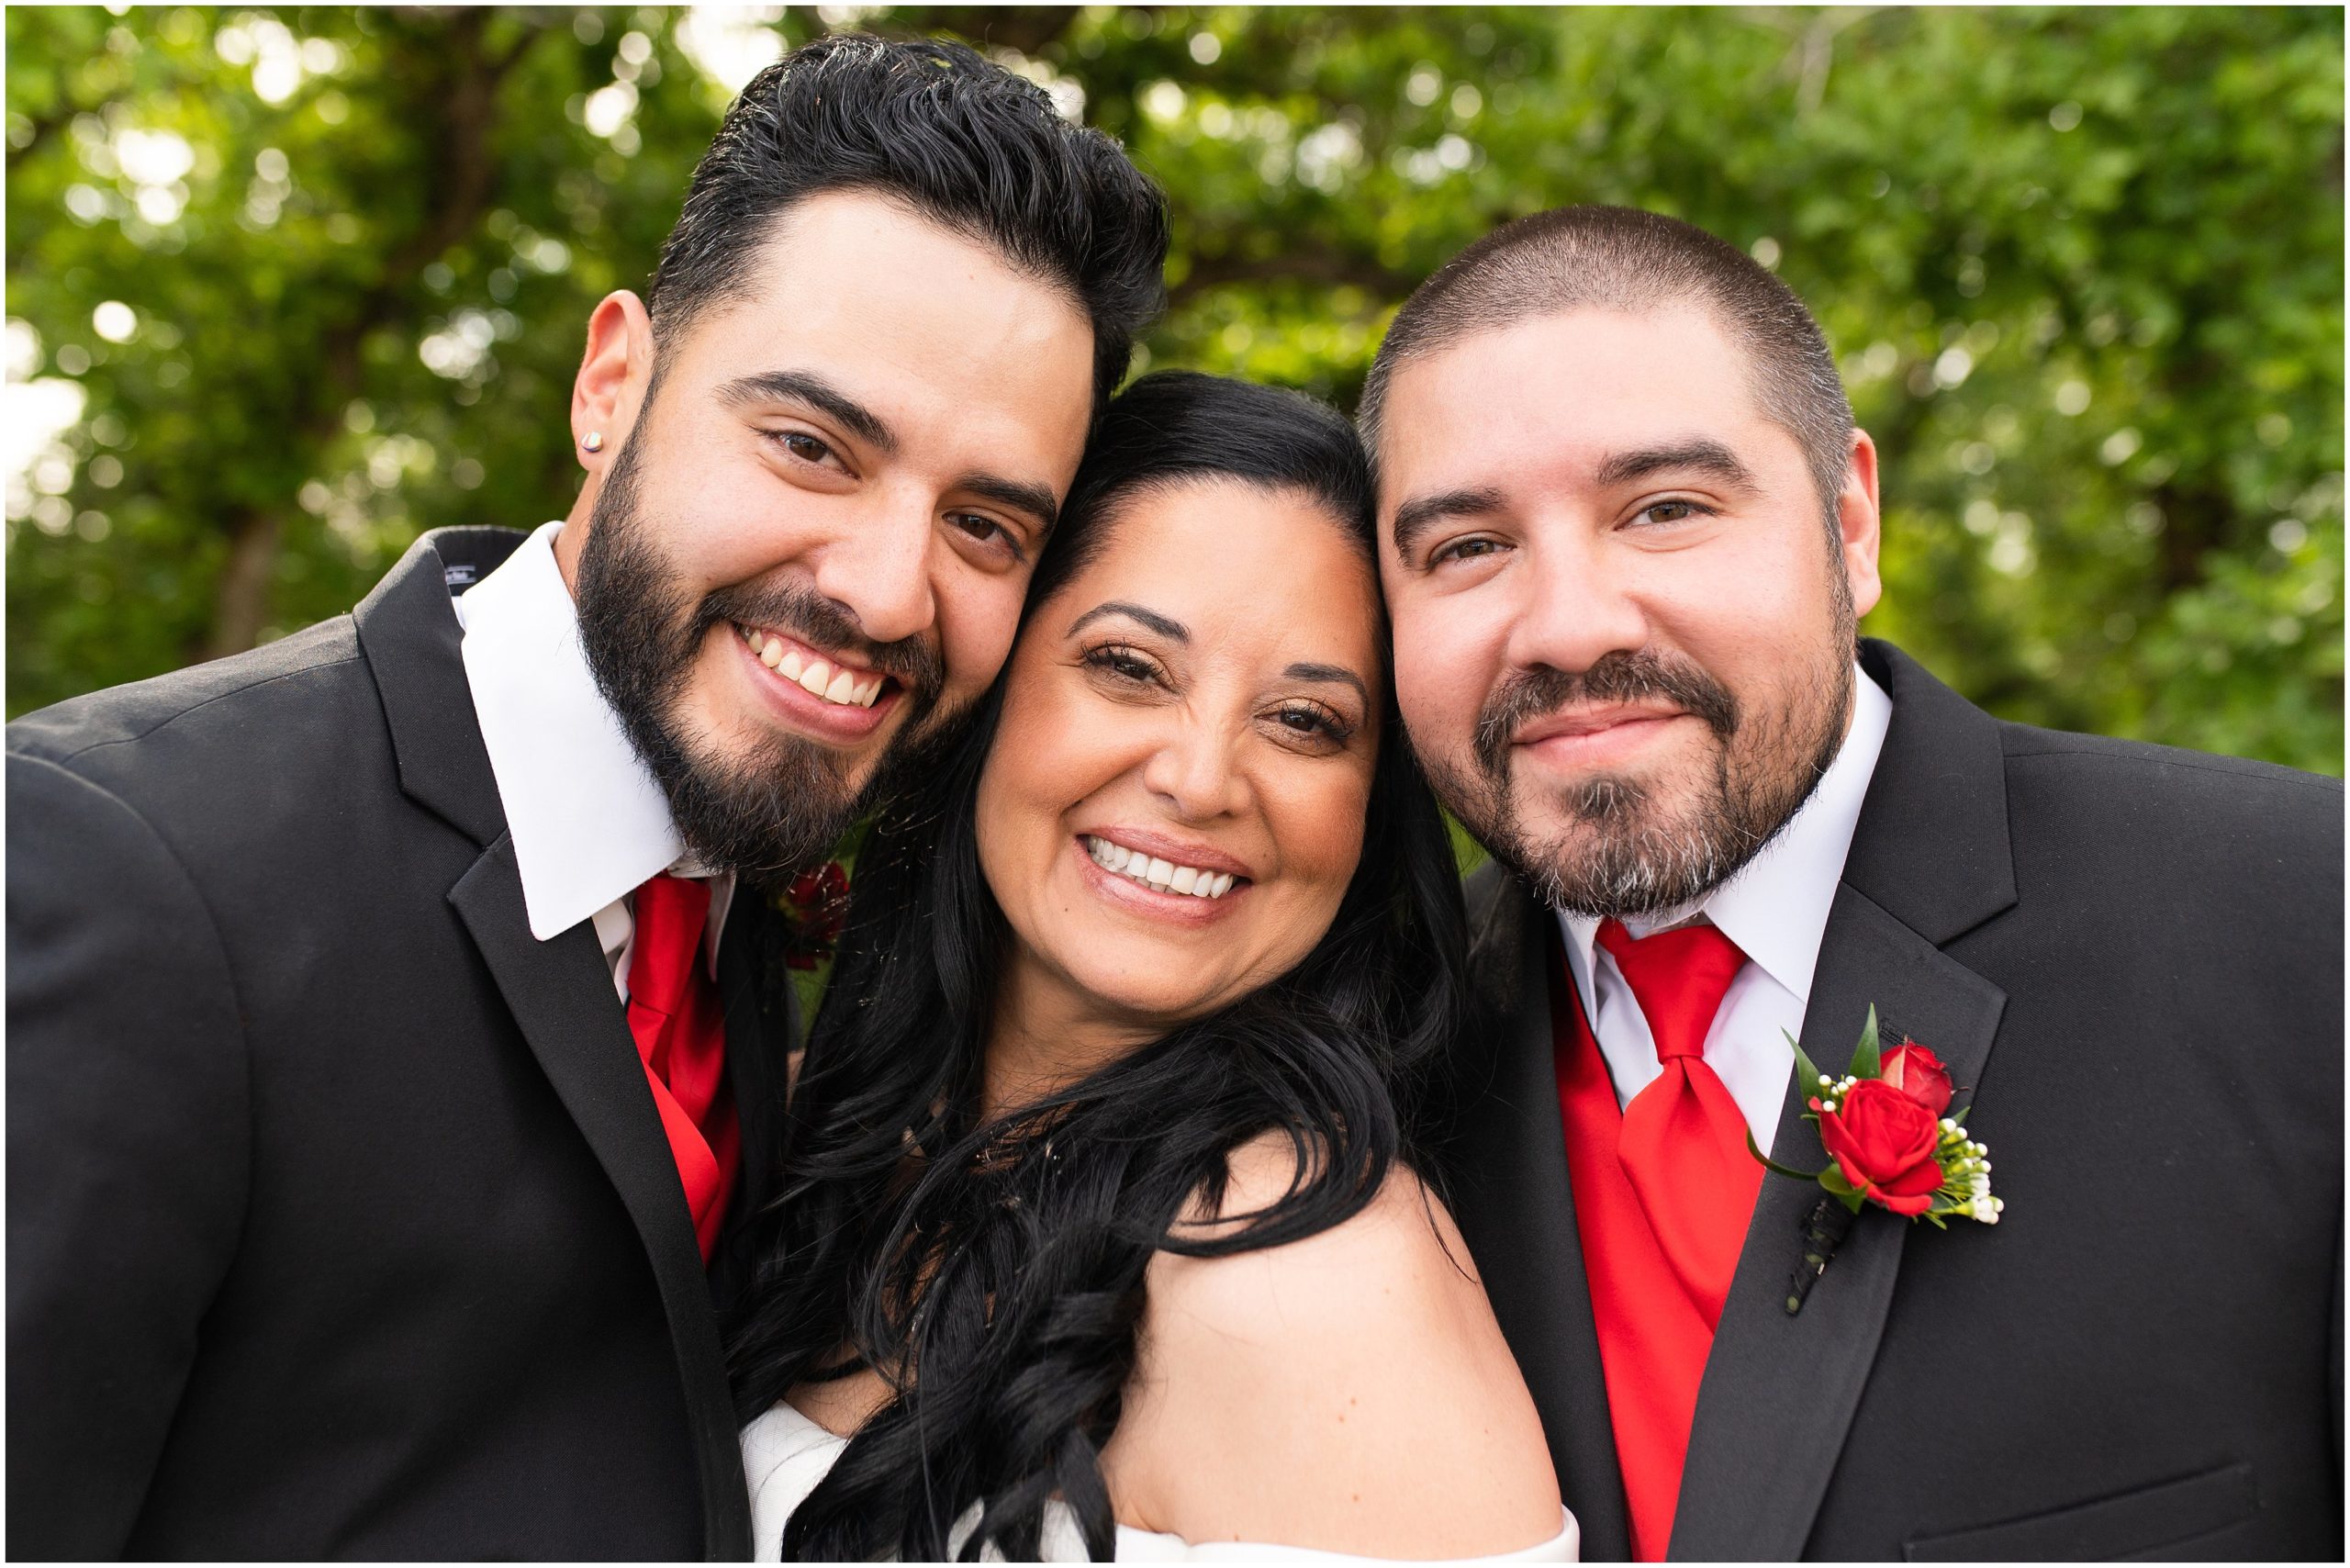 Red and black wedding family portraits candid | Red and Black Oak Hills Utah Spring Wedding | Jessie and Dallin Photography